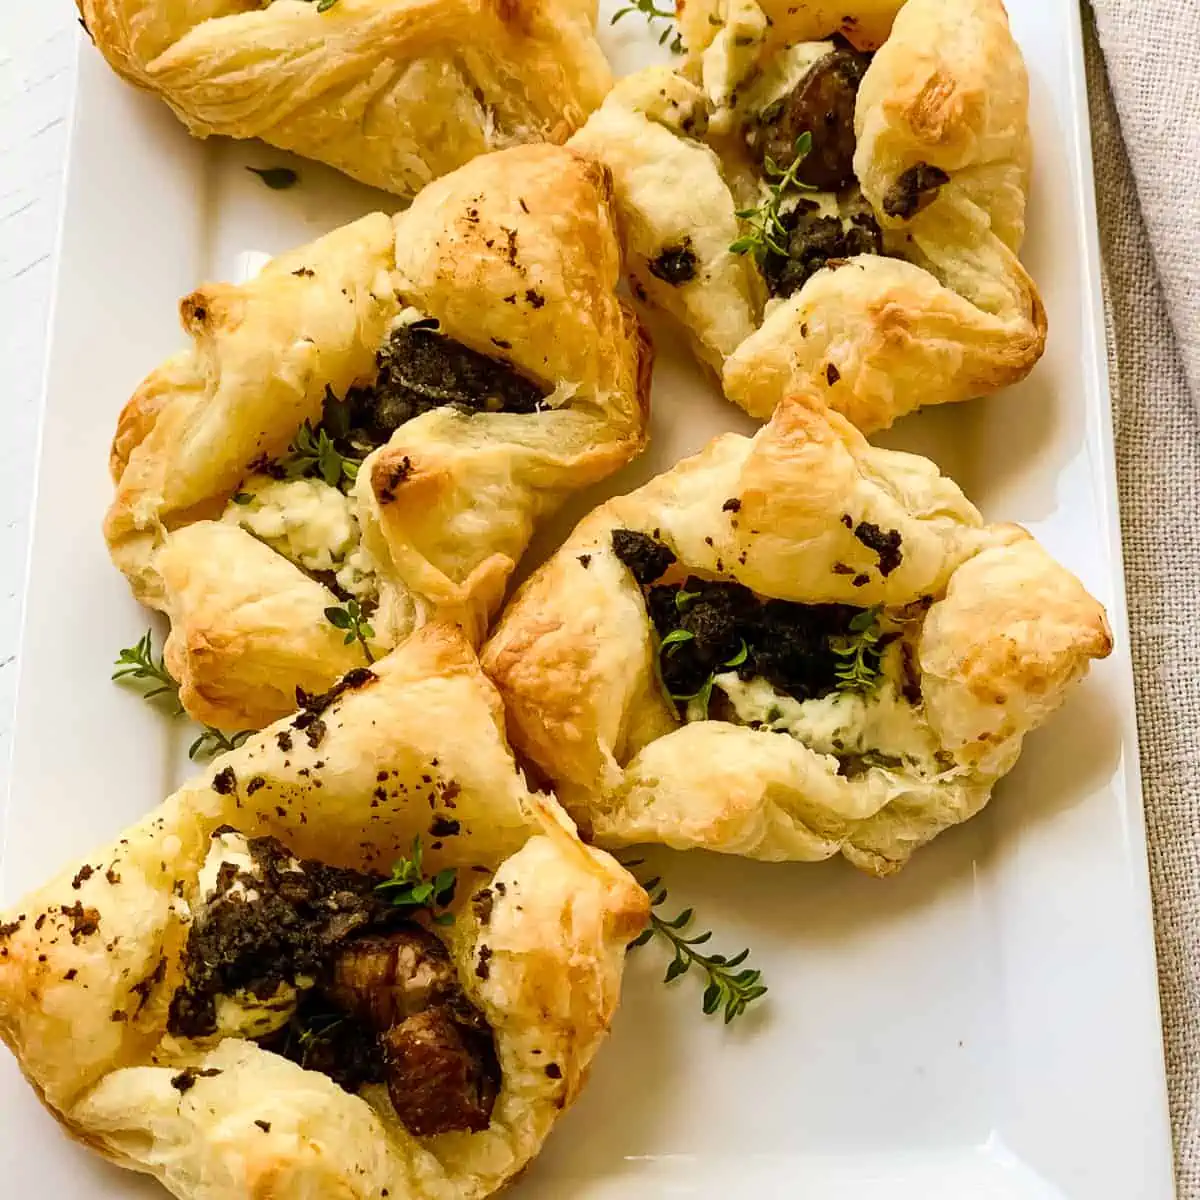 Five freshly baked puff pastry beef wellington appetizers on a rectangle white platter.